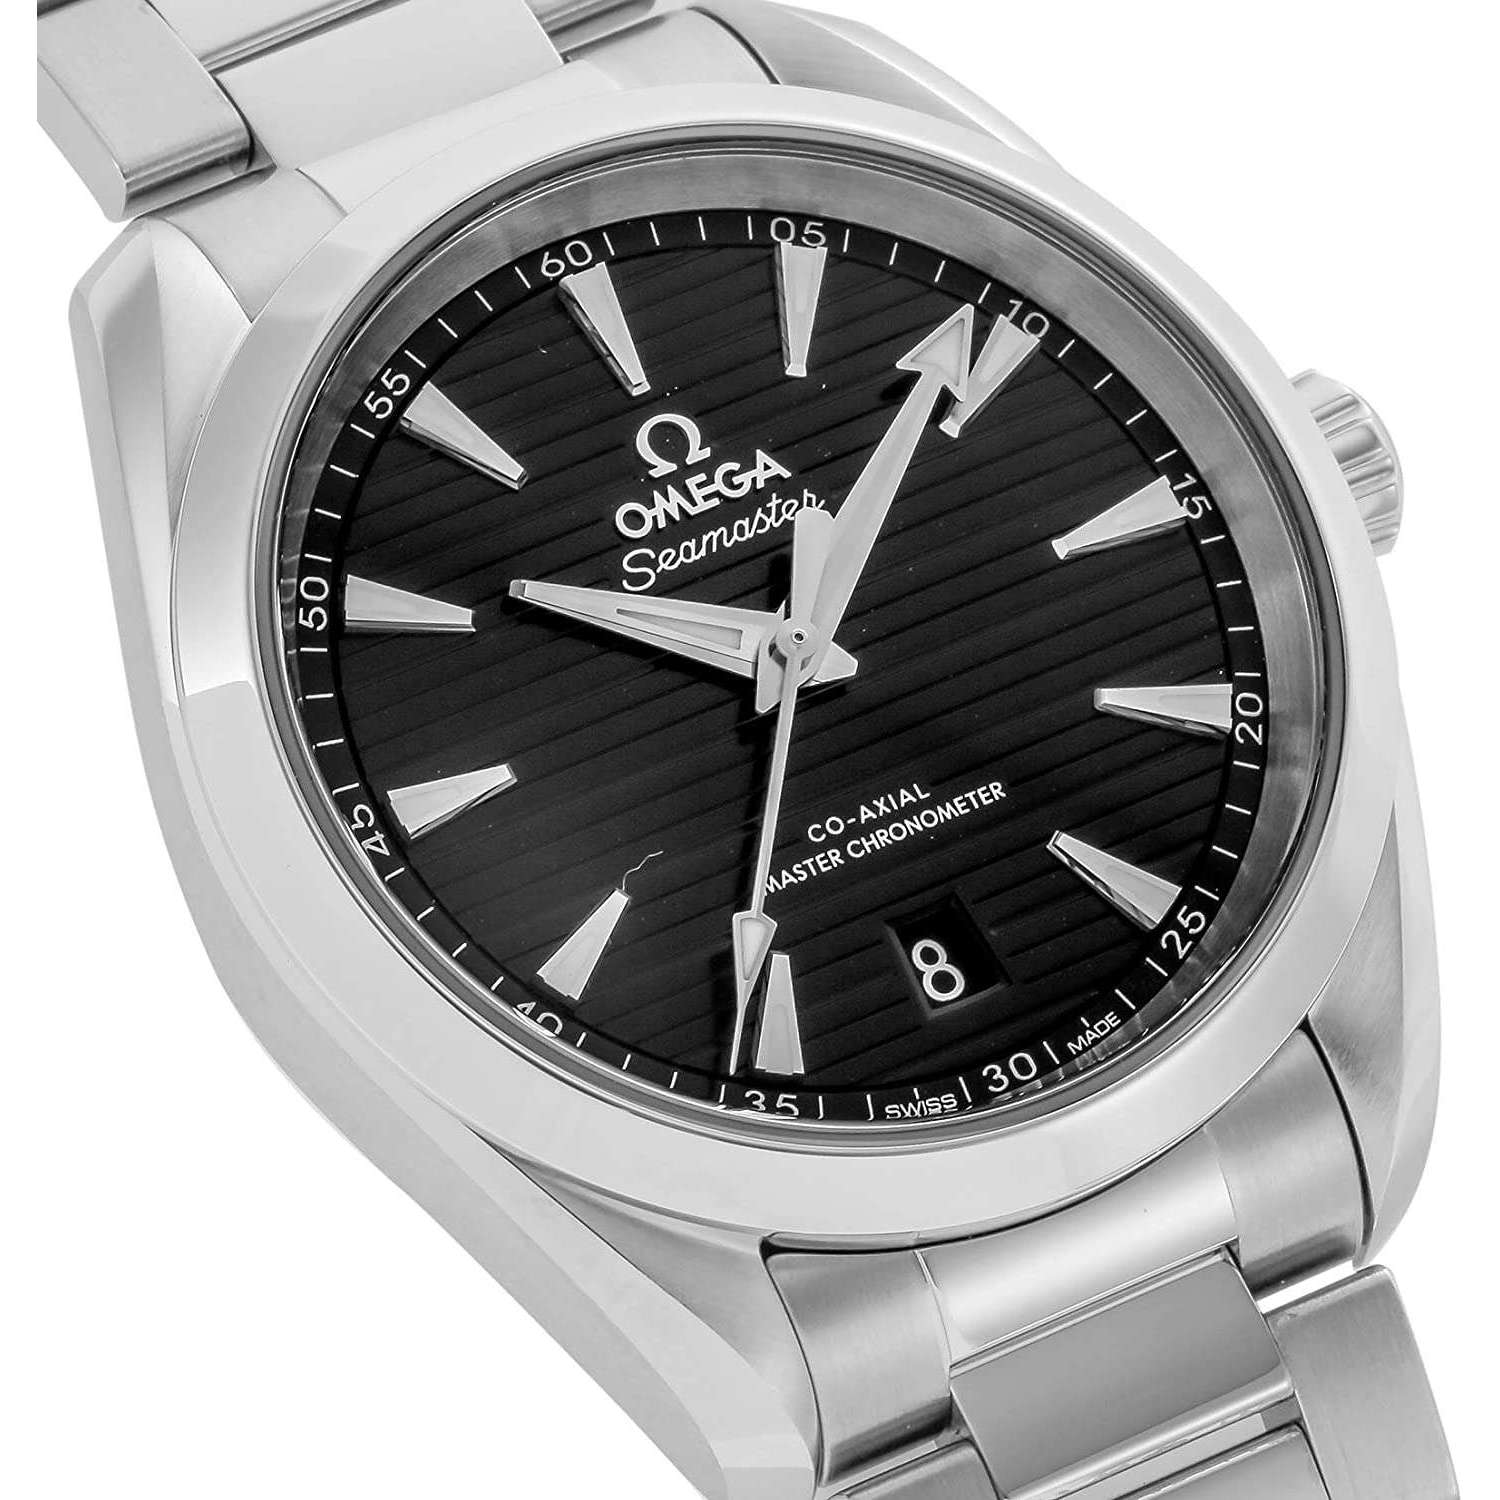 OMEGA SEAMASTER CO-AXIAL MASTER CHRONOMETER 37 MM MEN WATCH 220.10.38.20.01.001 - ROOK JAPAN